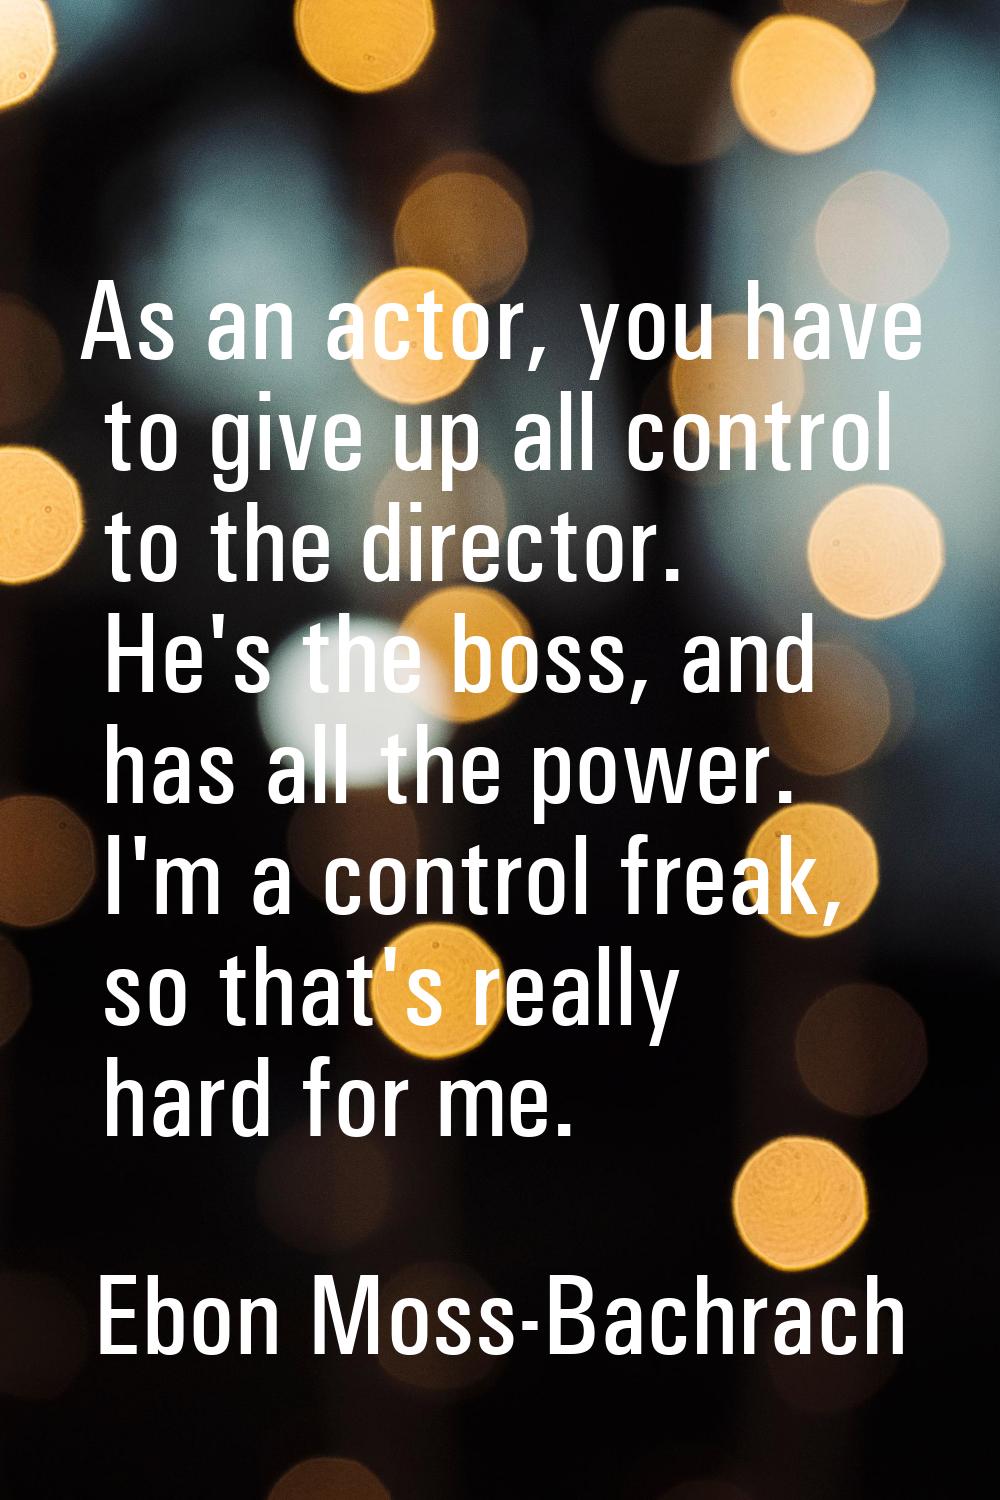 As an actor, you have to give up all control to the director. He's the boss, and has all the power.